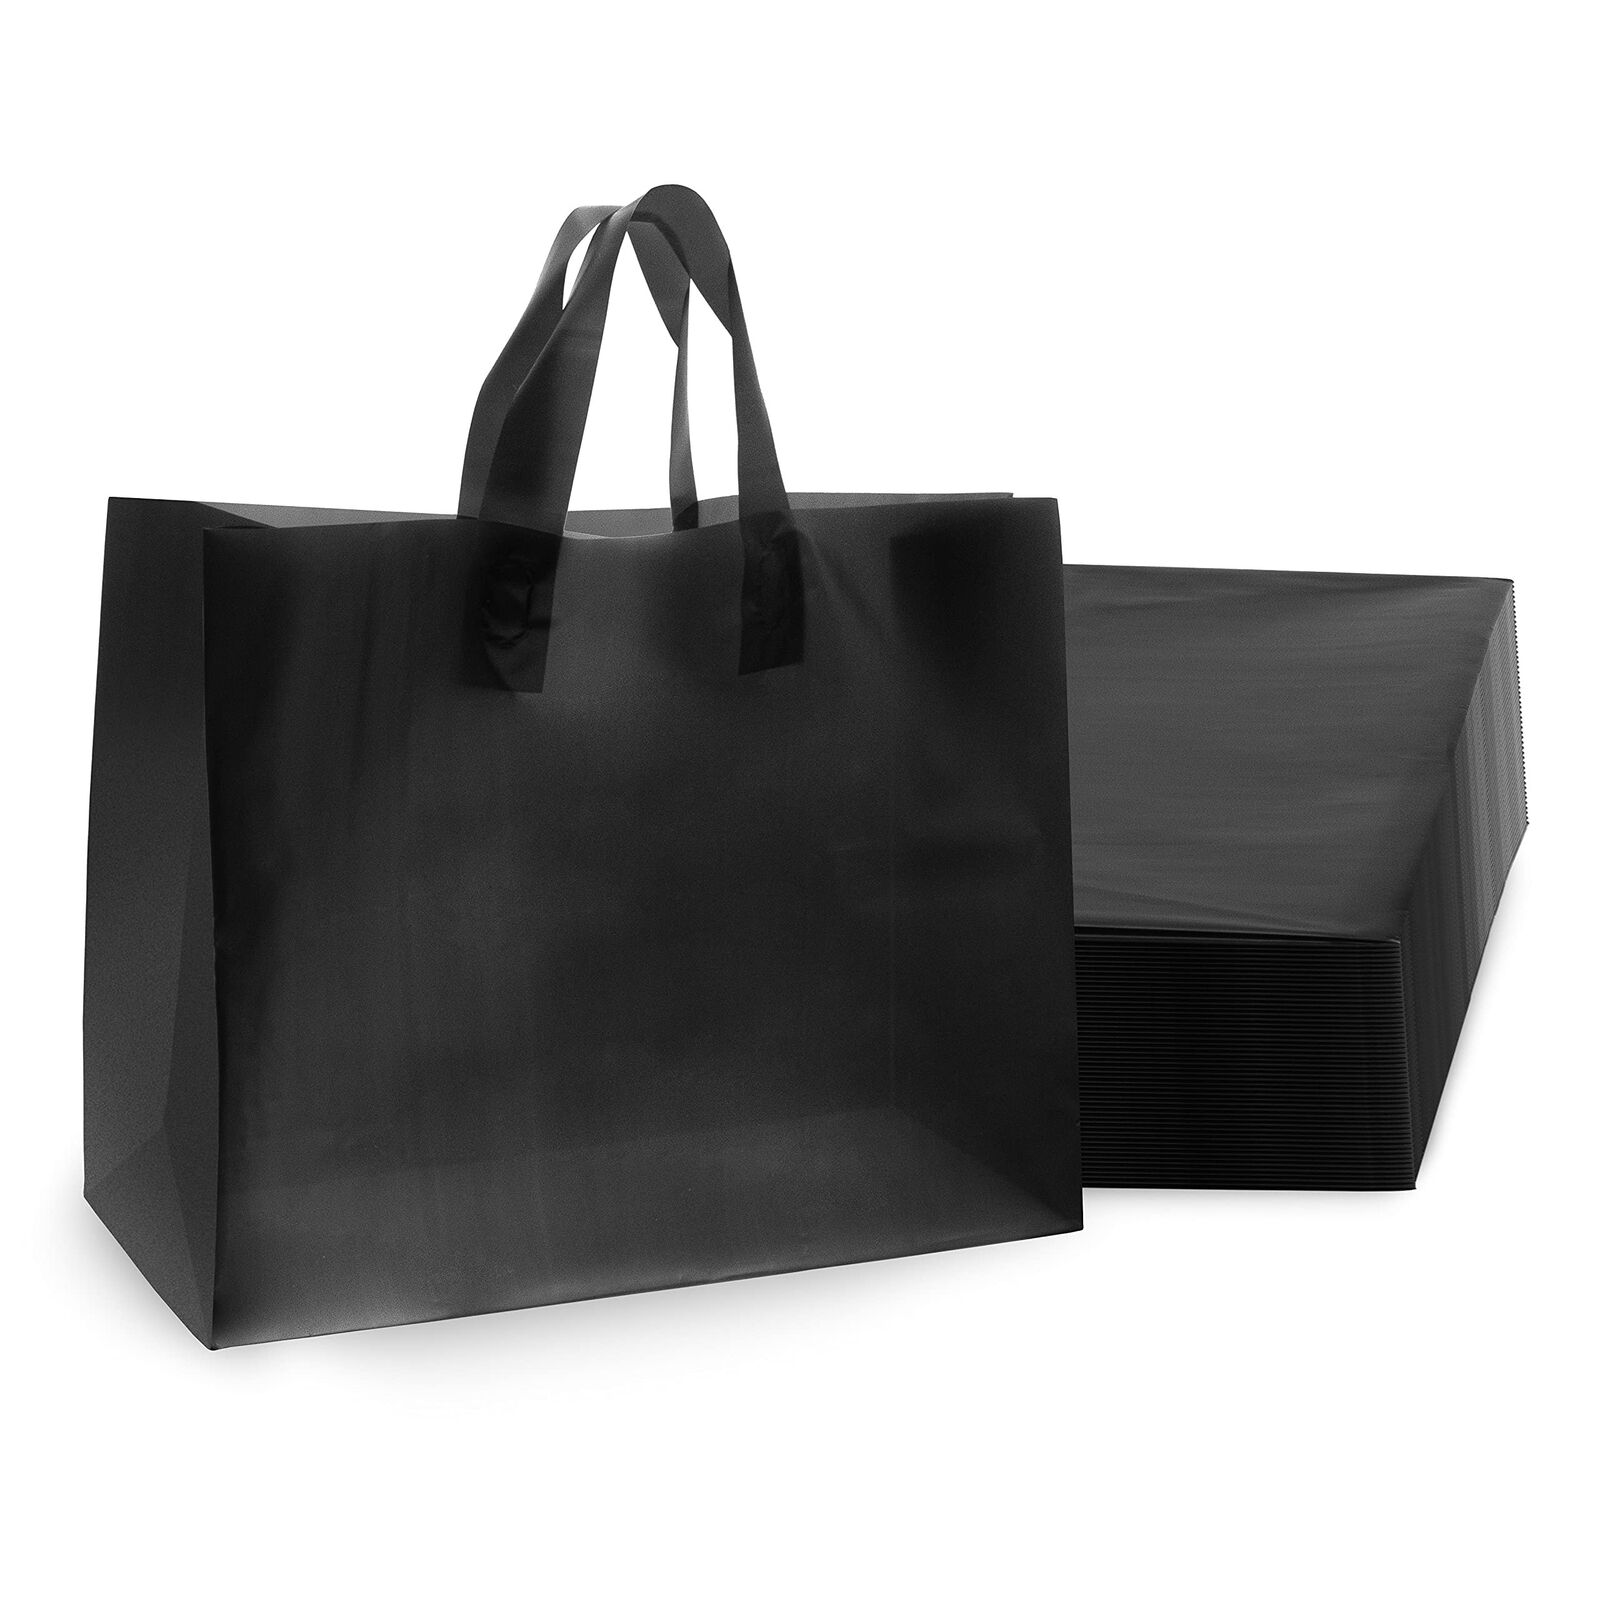 Prime Line Packaging 16x6x12 100 Pack Black Shopping Bags with Handles, Large...